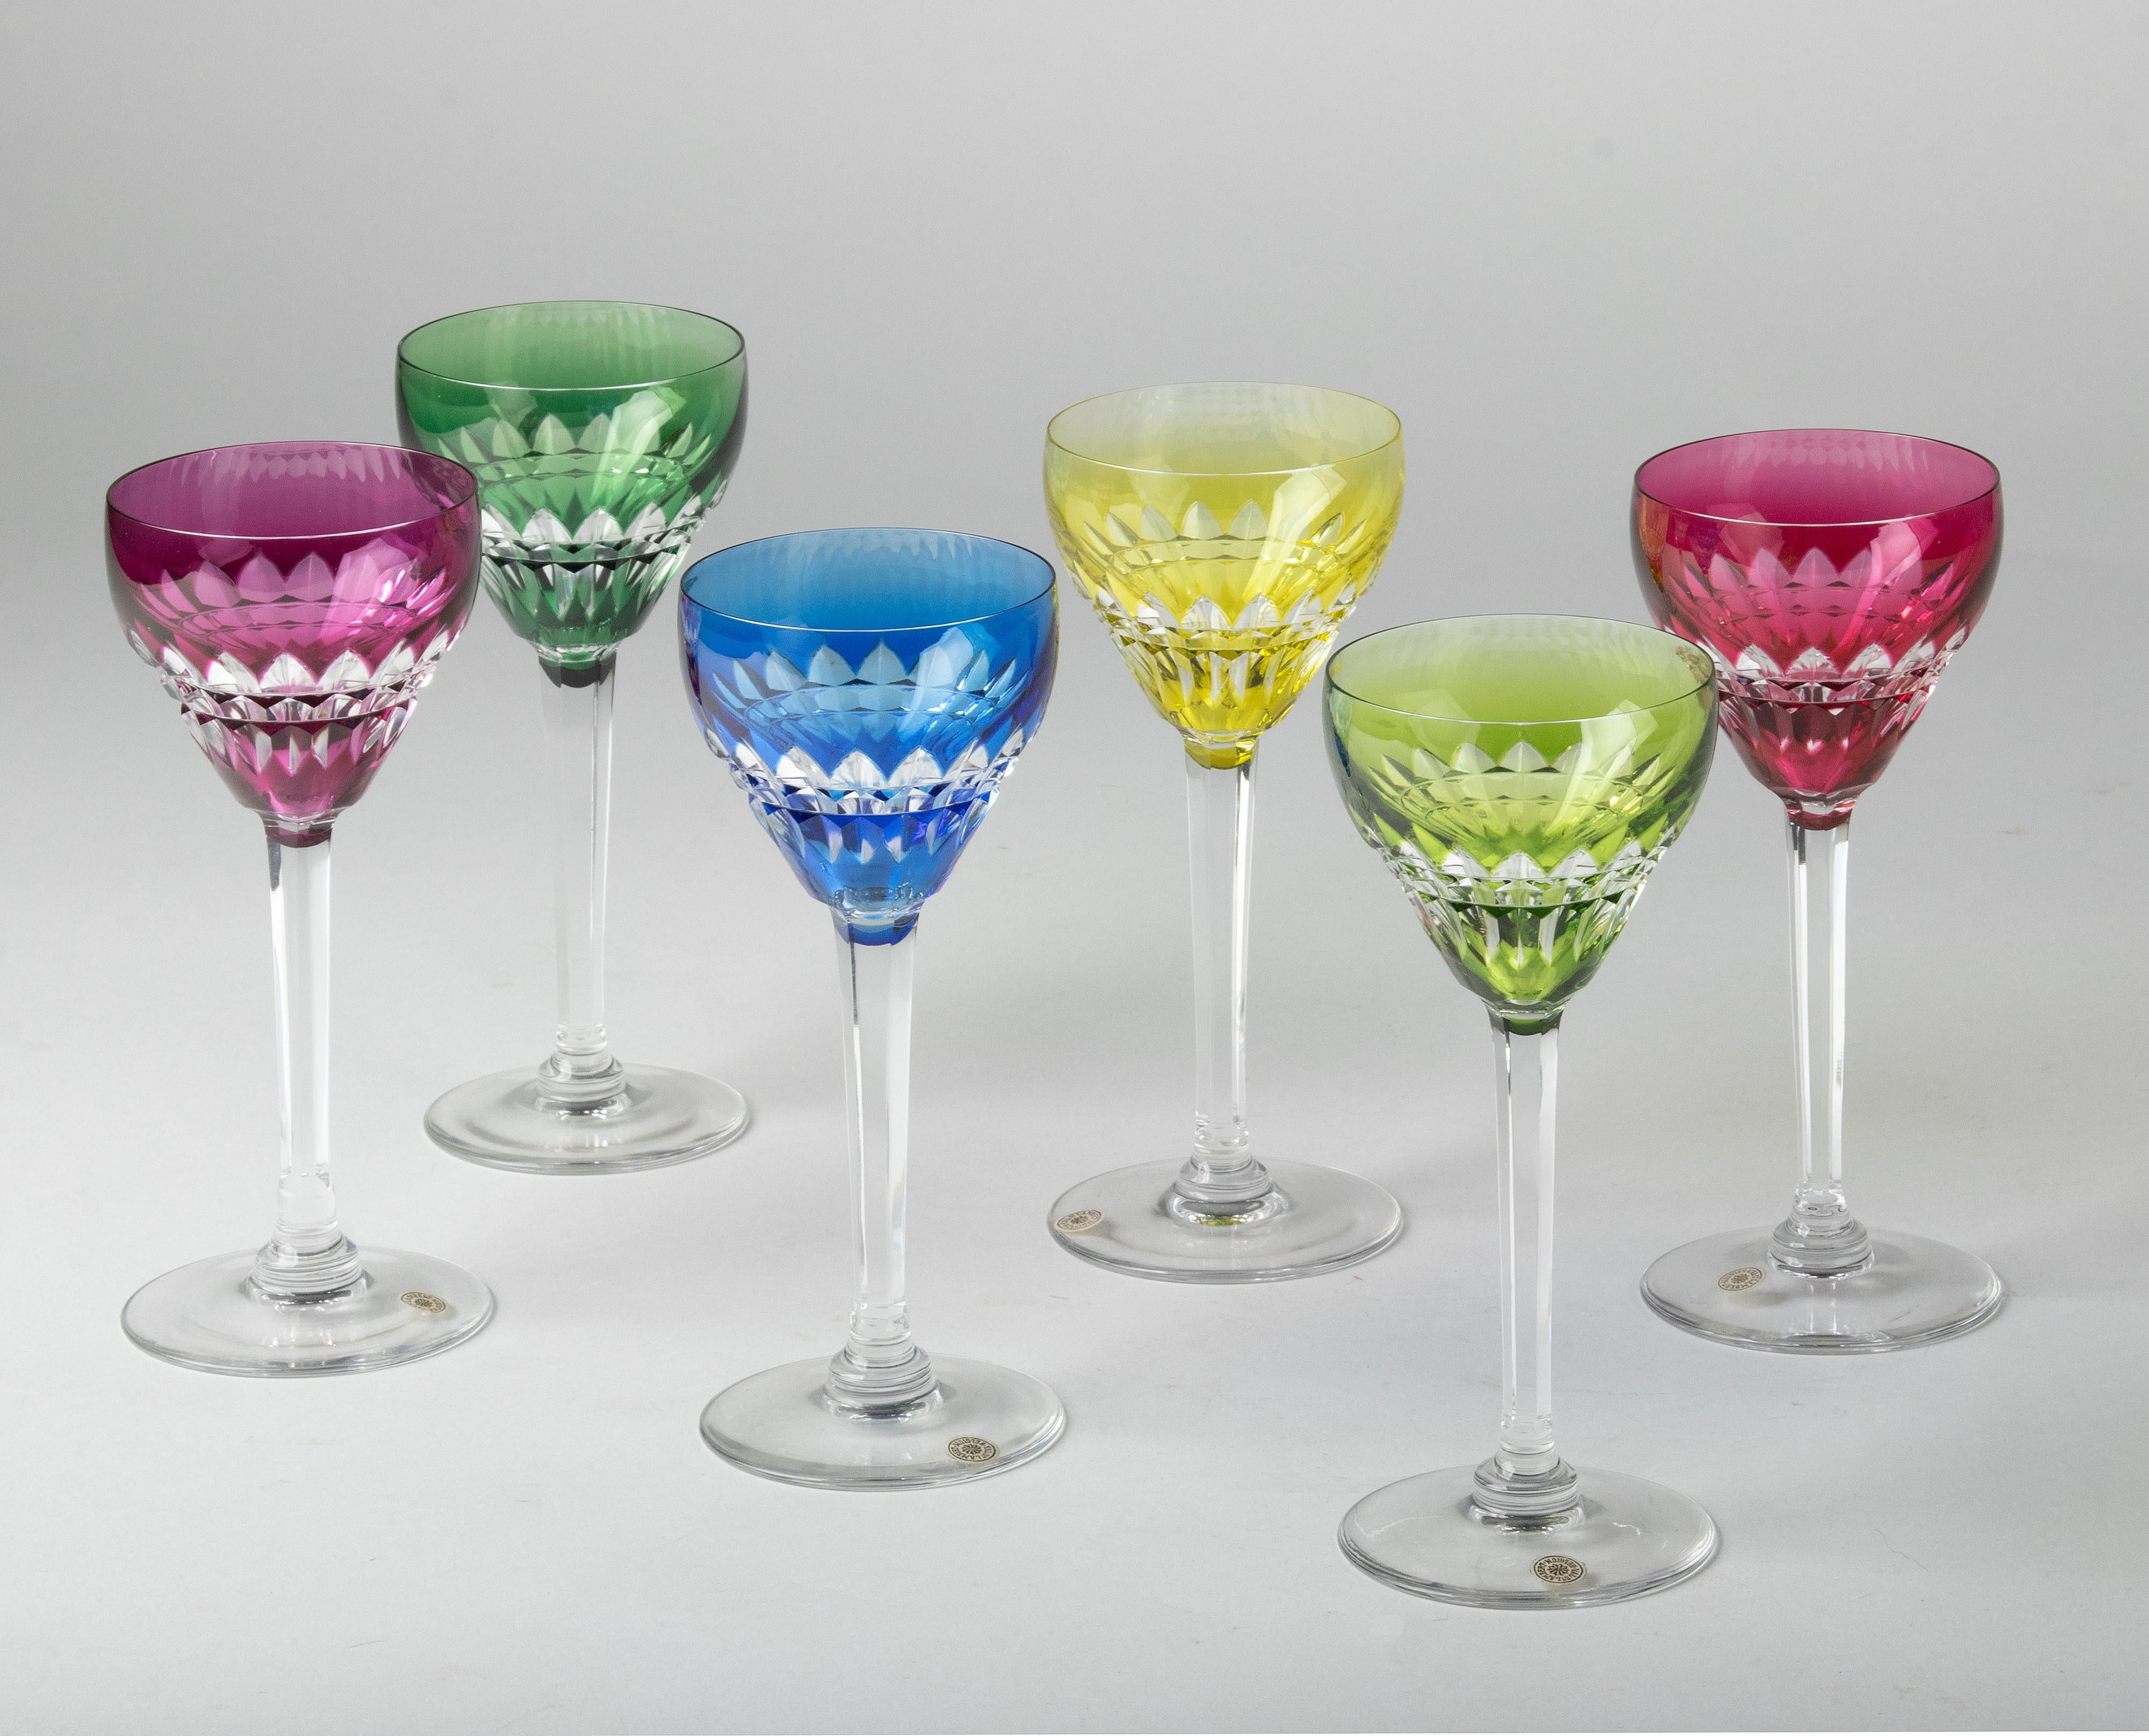 Beautiful set of 6 crystal wine glasses from the Belgian brand Val Saint Lambert. The glasses have beautiful bright colors and a nice cut. The crystal is of a beautiful quality. The glasses are in very good condition. No chips.